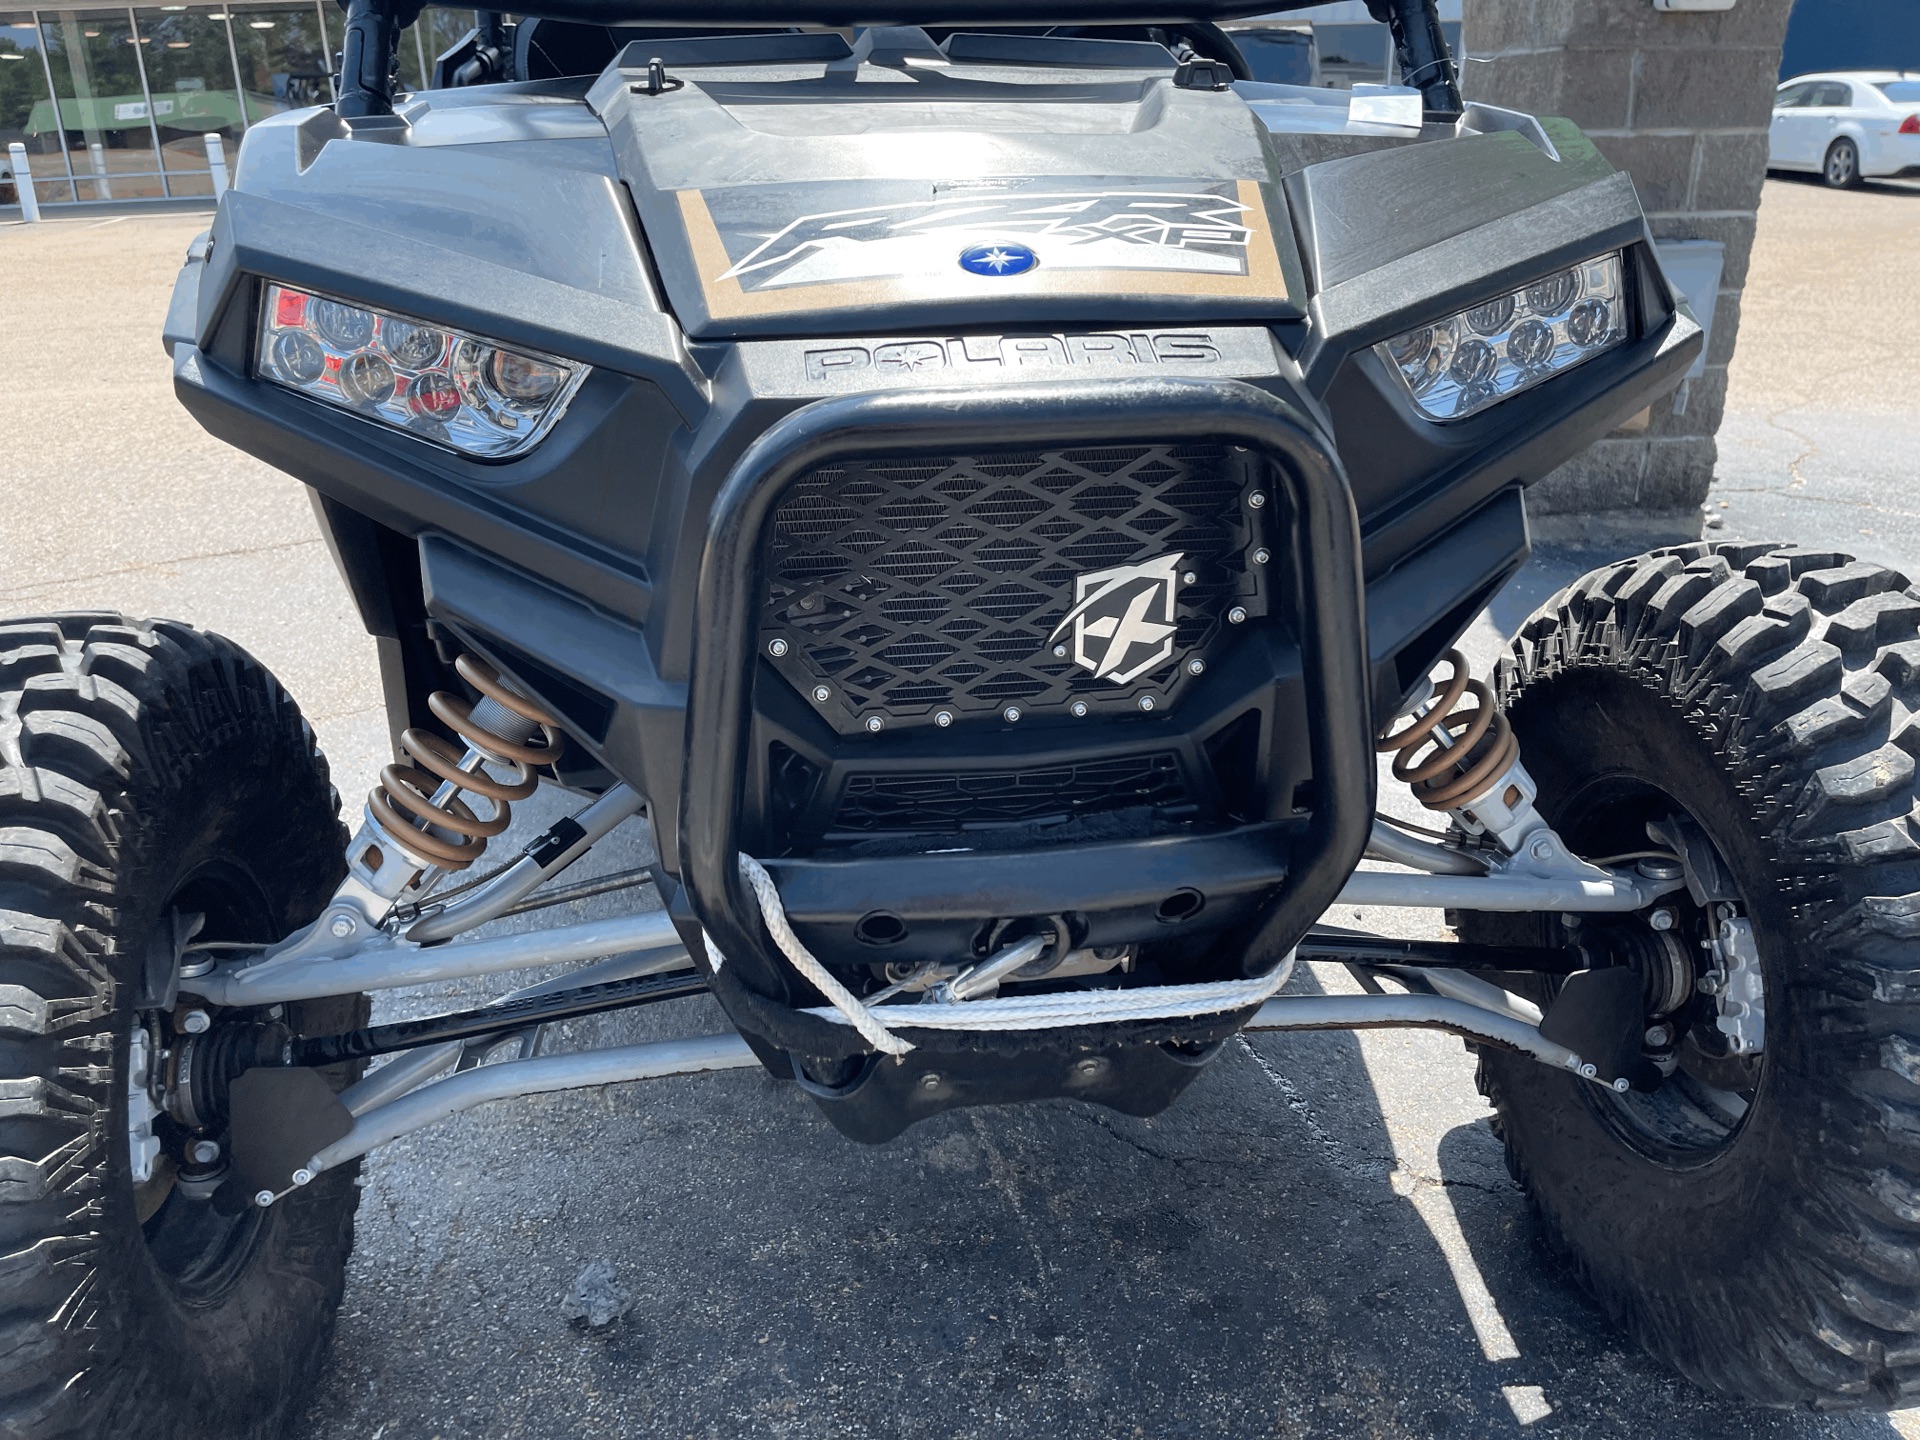 2018 Polaris RZR XP 1000 EPS Trails and Rocks Edition in Dyersburg, Tennessee - Photo 10